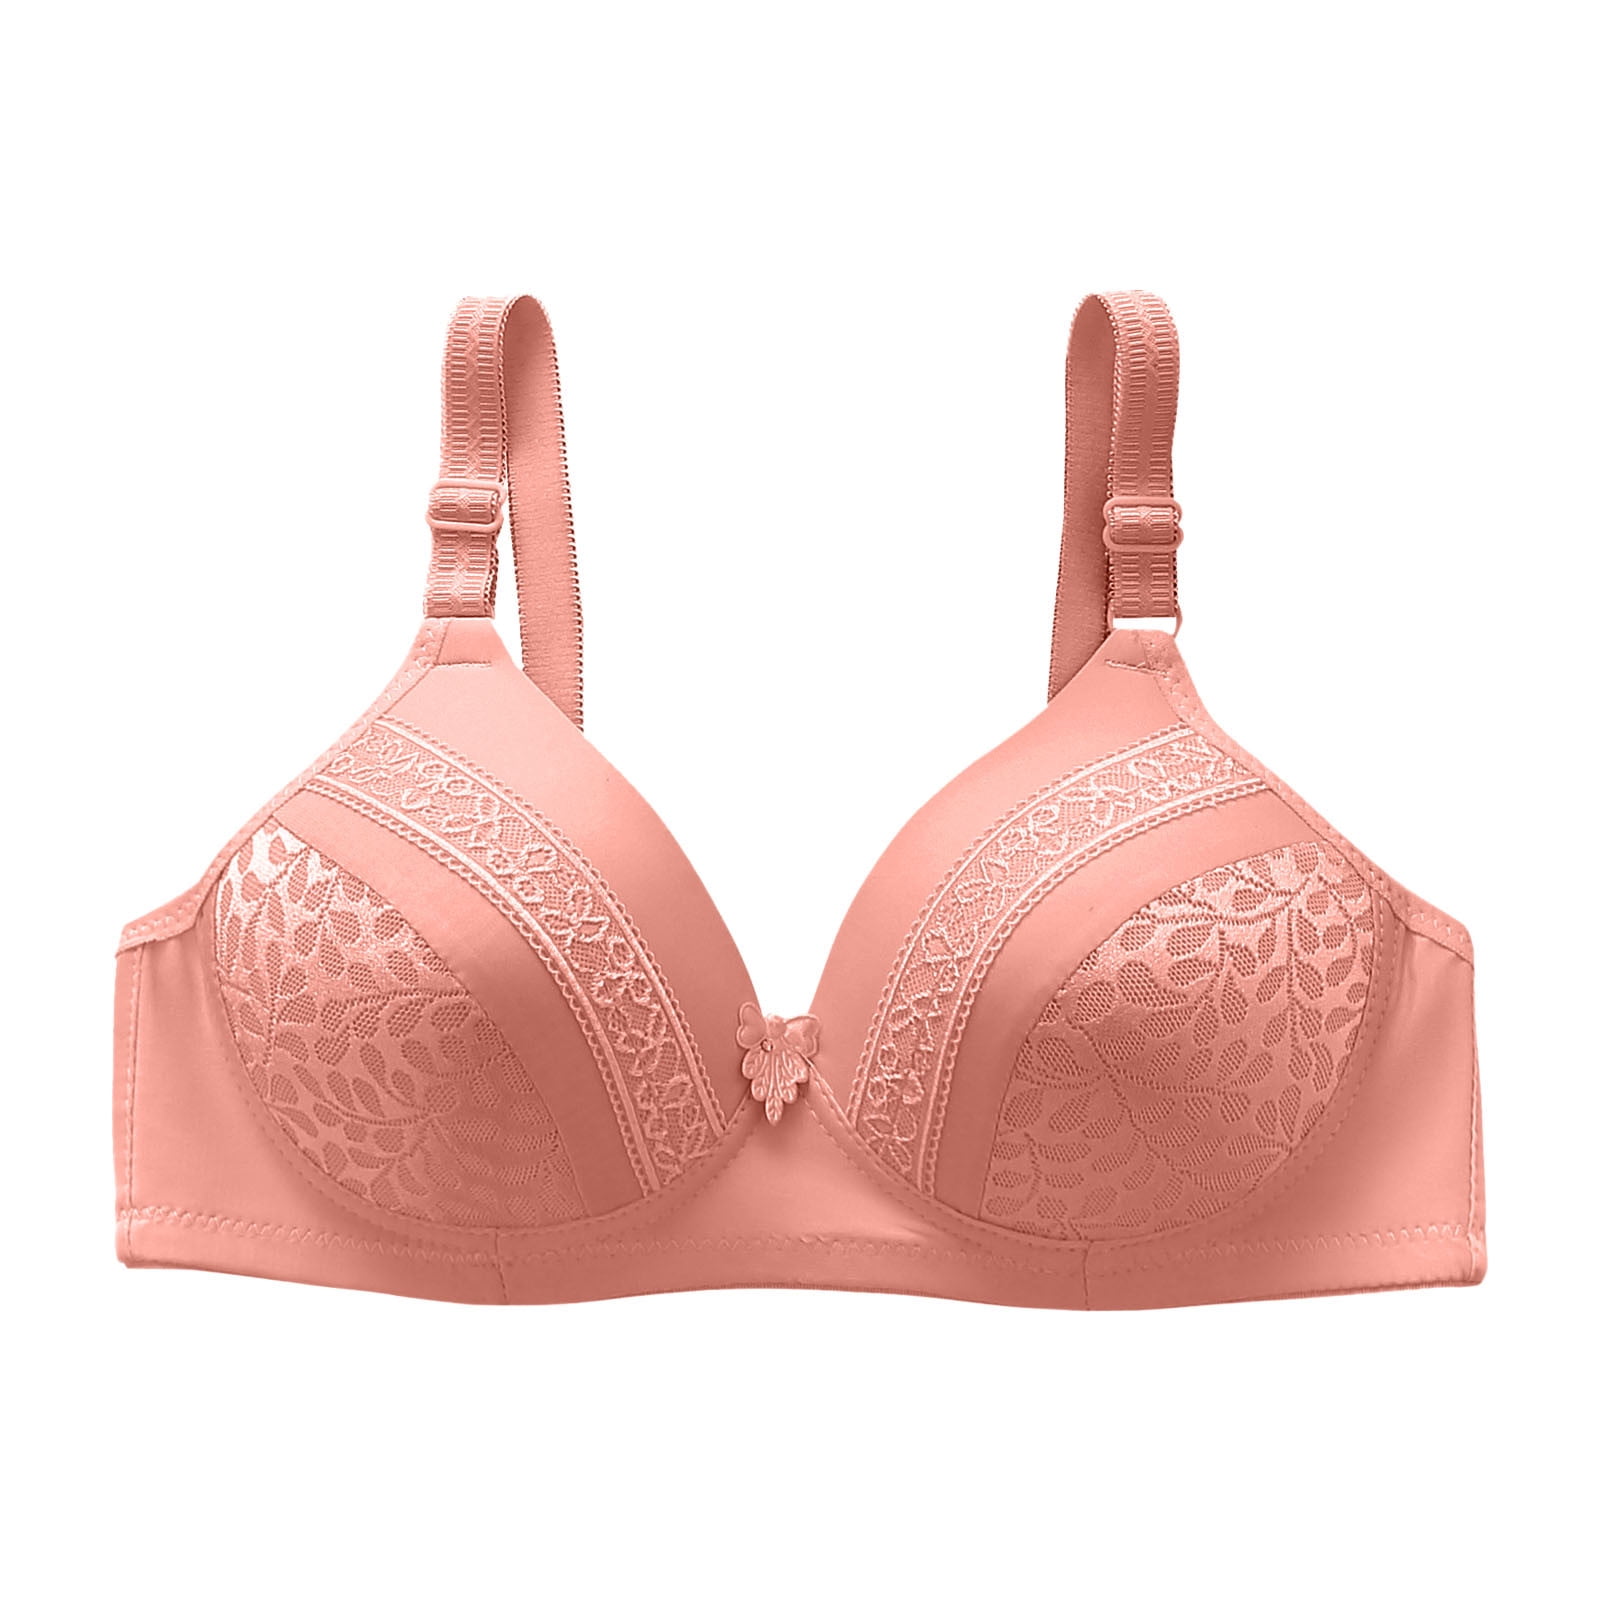 TAIAOJING Push Up Bras for Women B Cup Soft Push Up Lace Lace